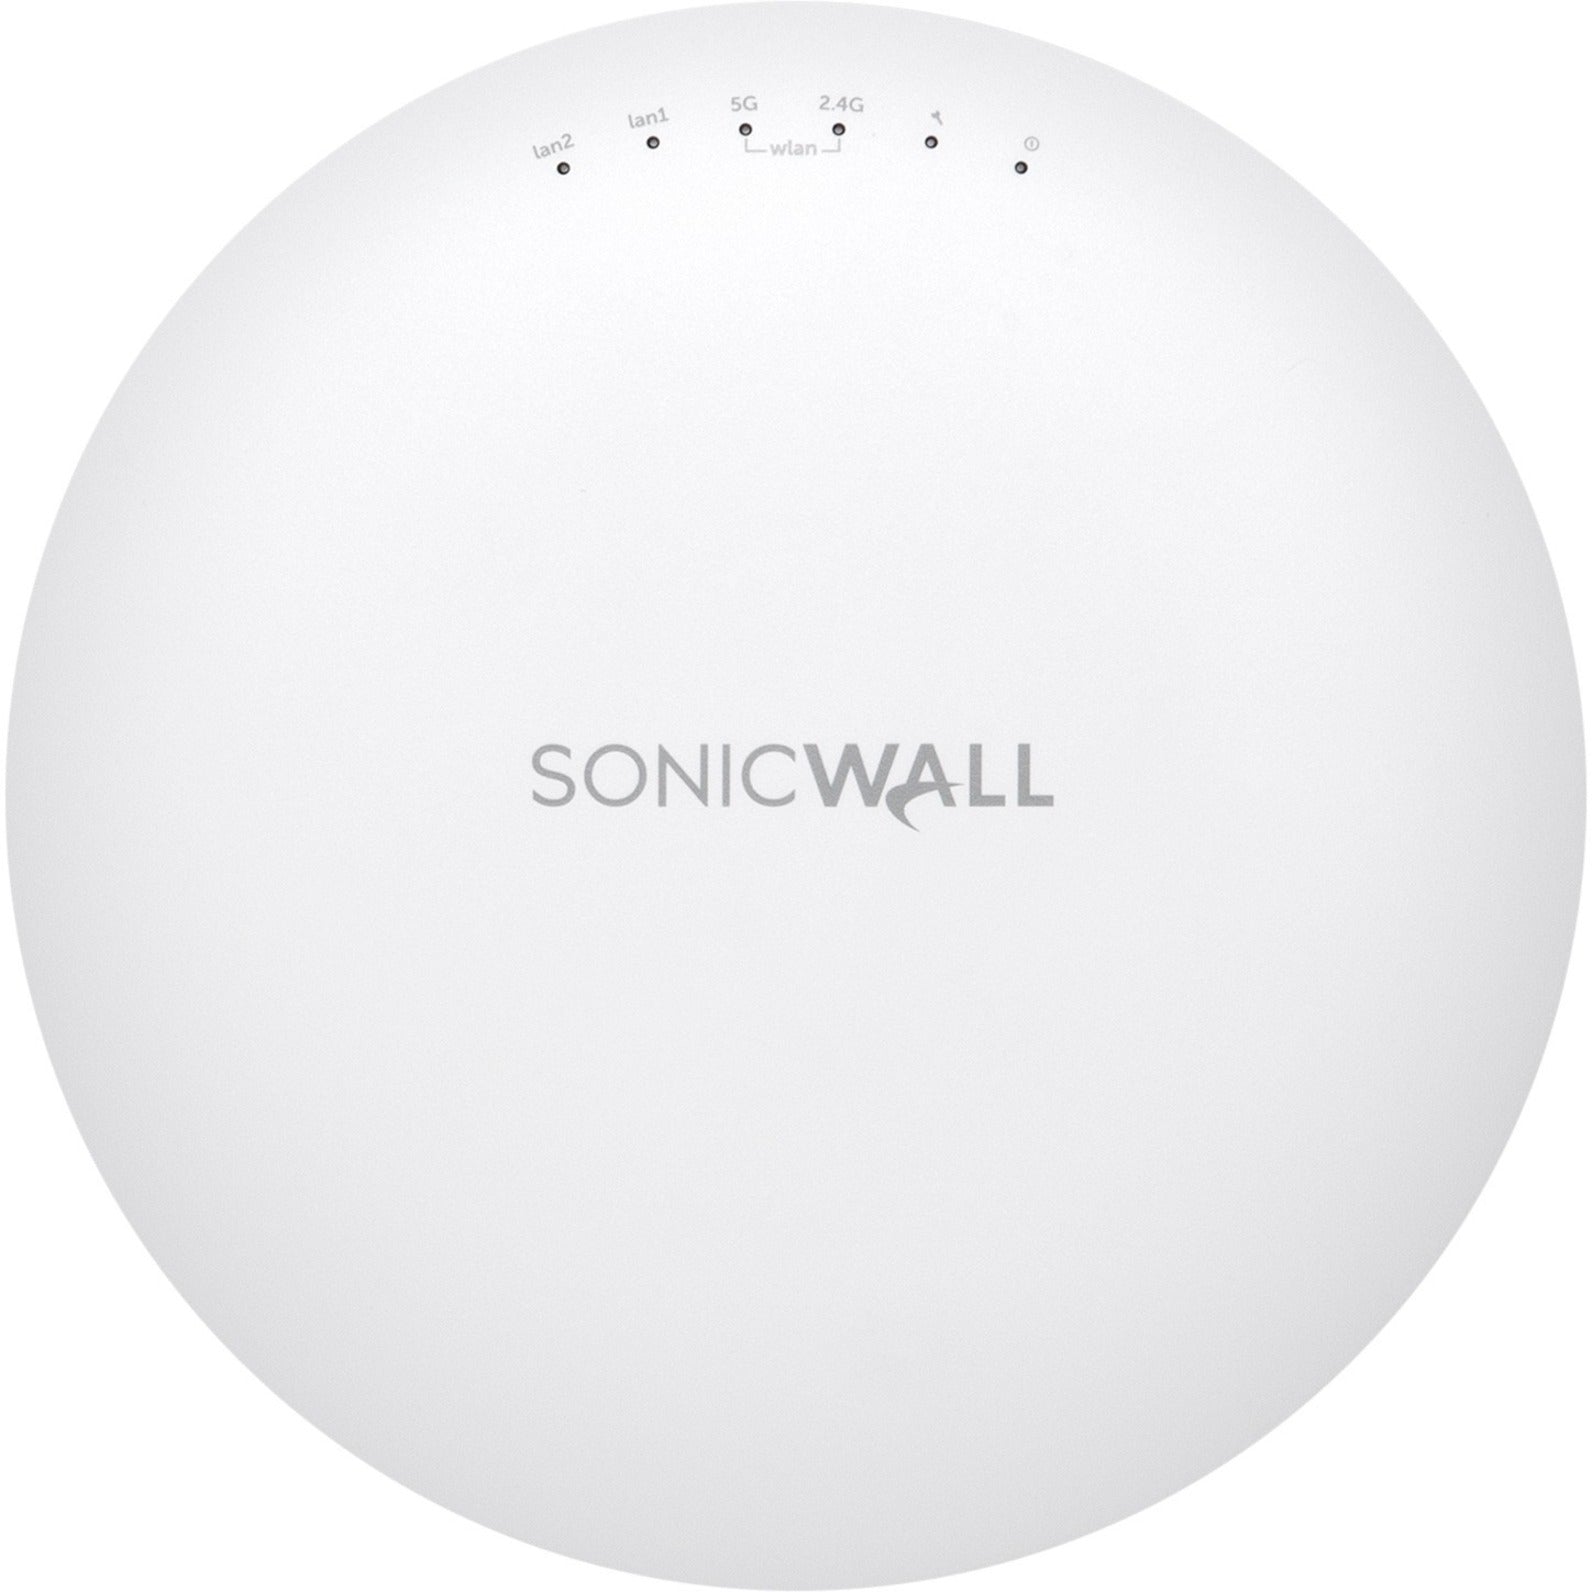 SonicWall 02-SSC-2630 SonicWave 432i Wireless Access Point, 8-Pack with Advanced Secure Cloud WiFi Management and Support 3YR (No PoE)